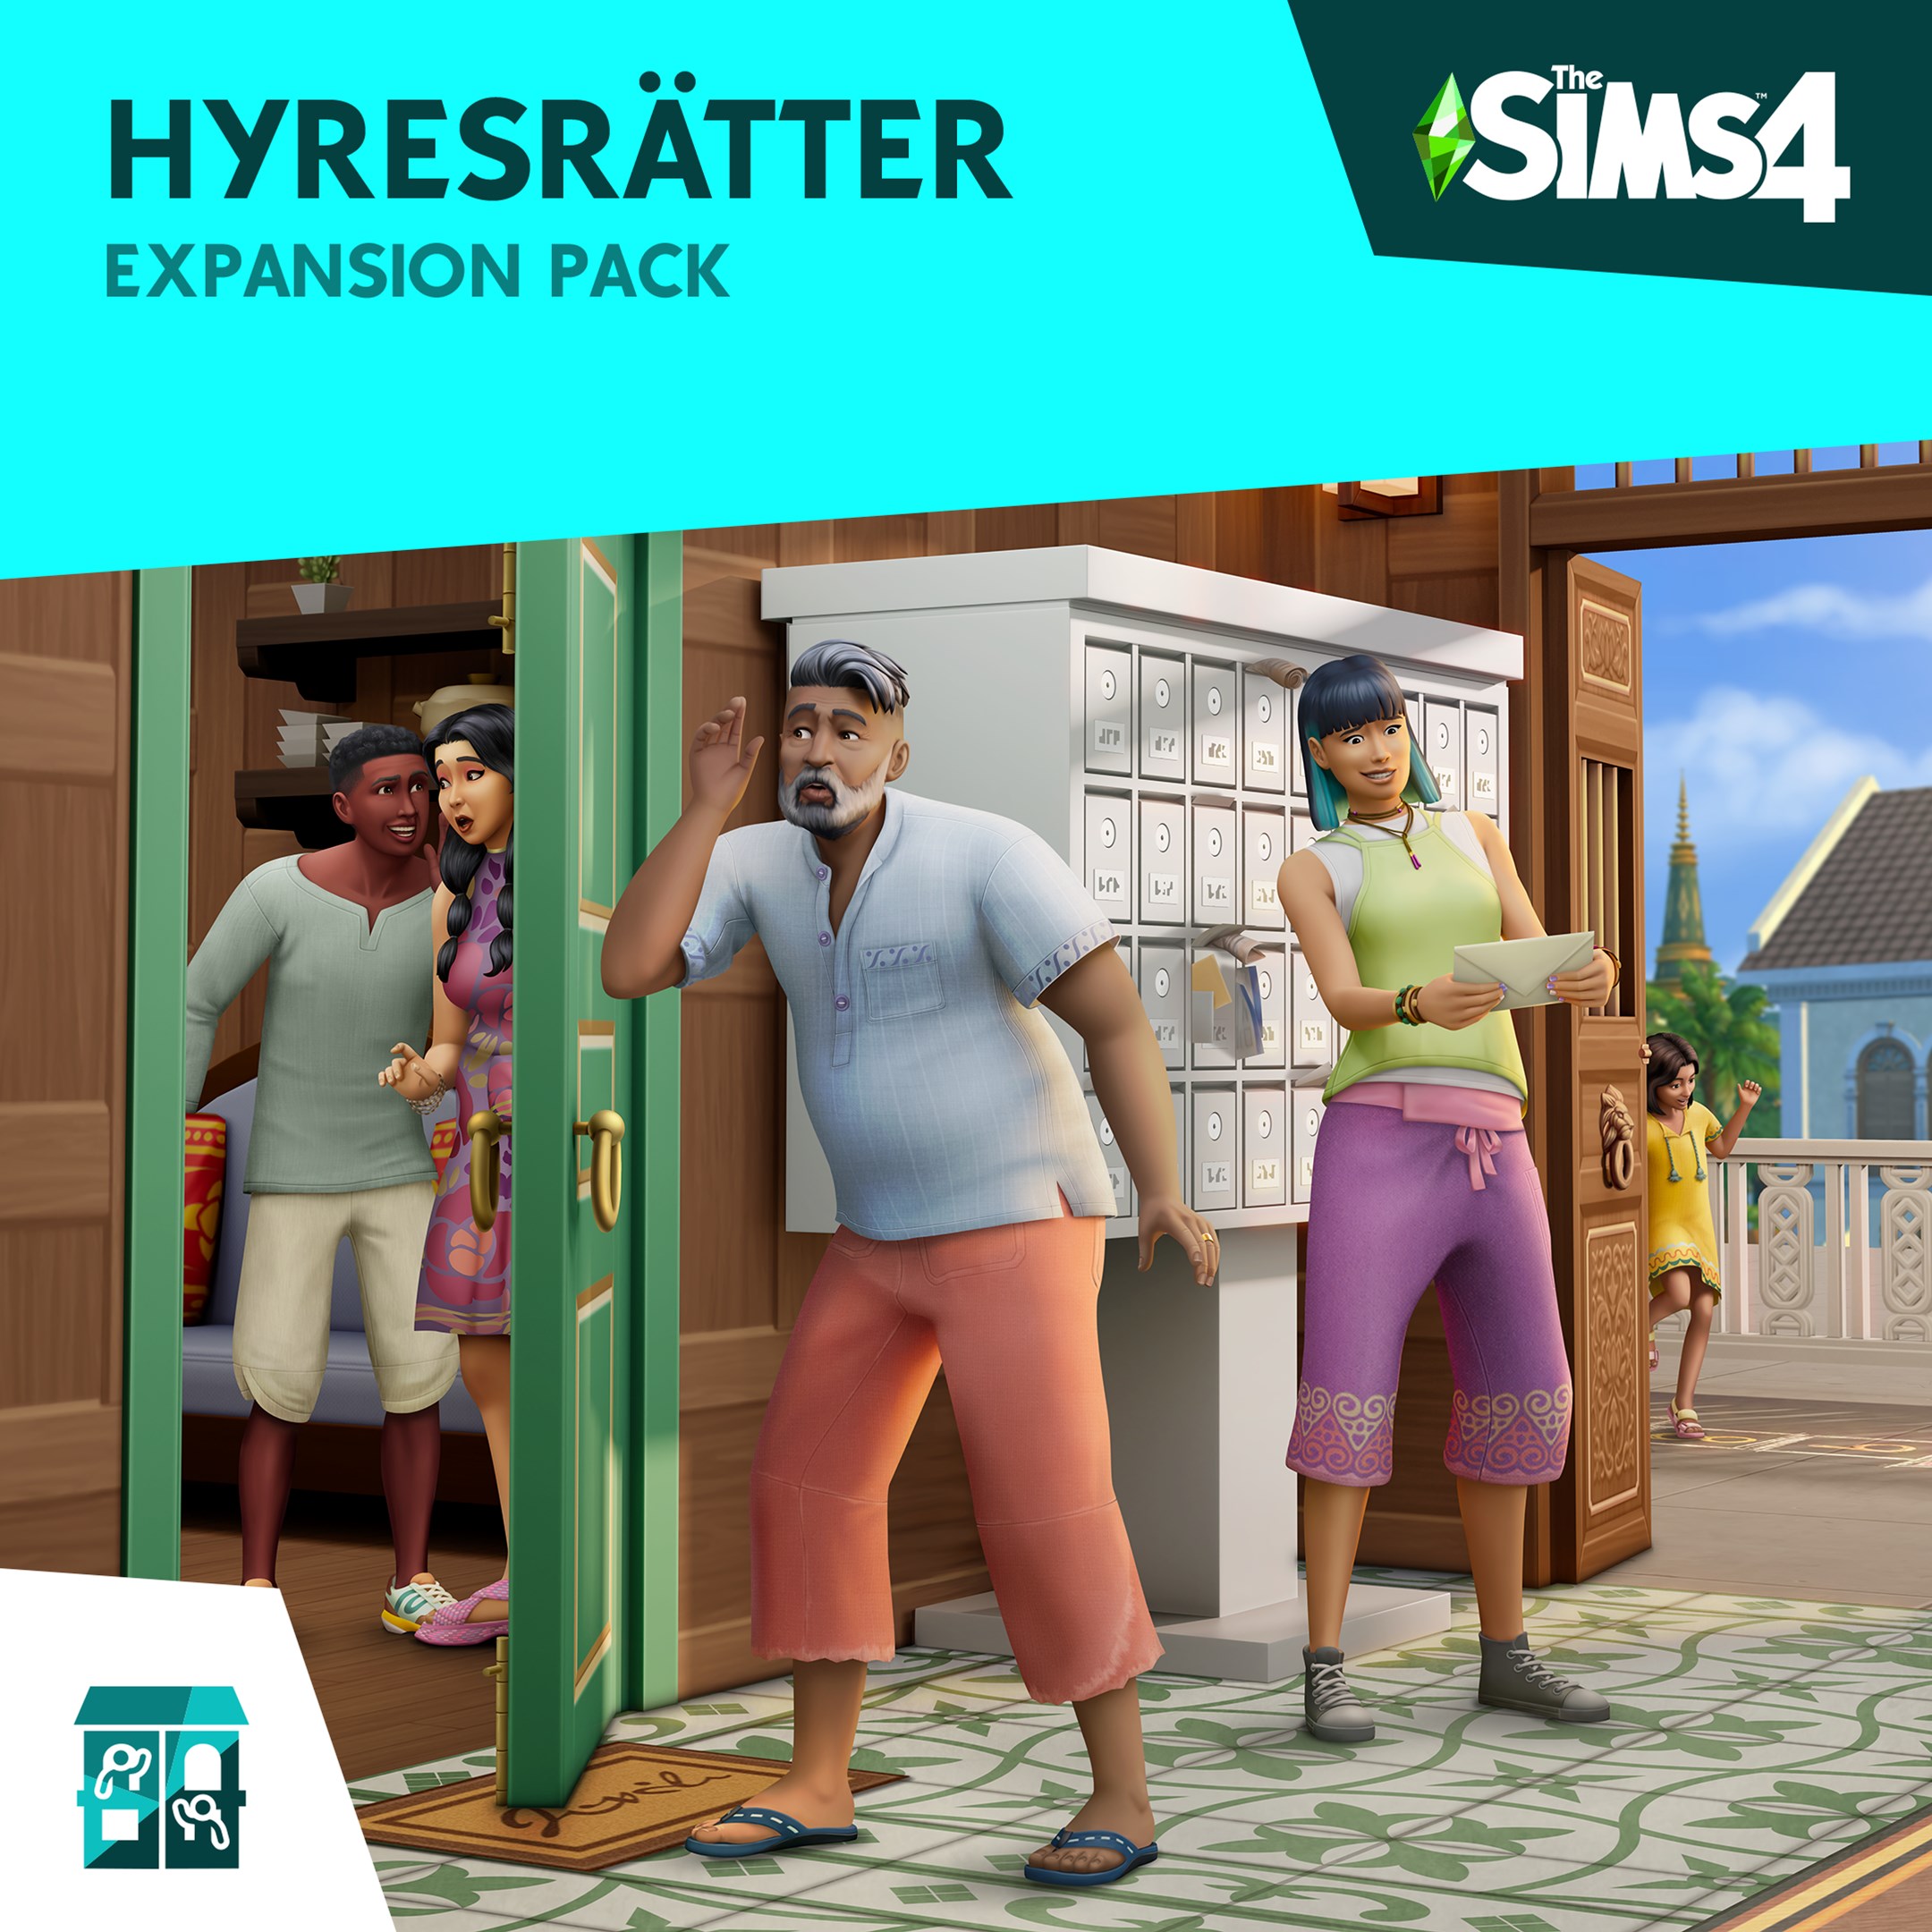 The Sims™ 4 Hyresrätter Expansion Pack